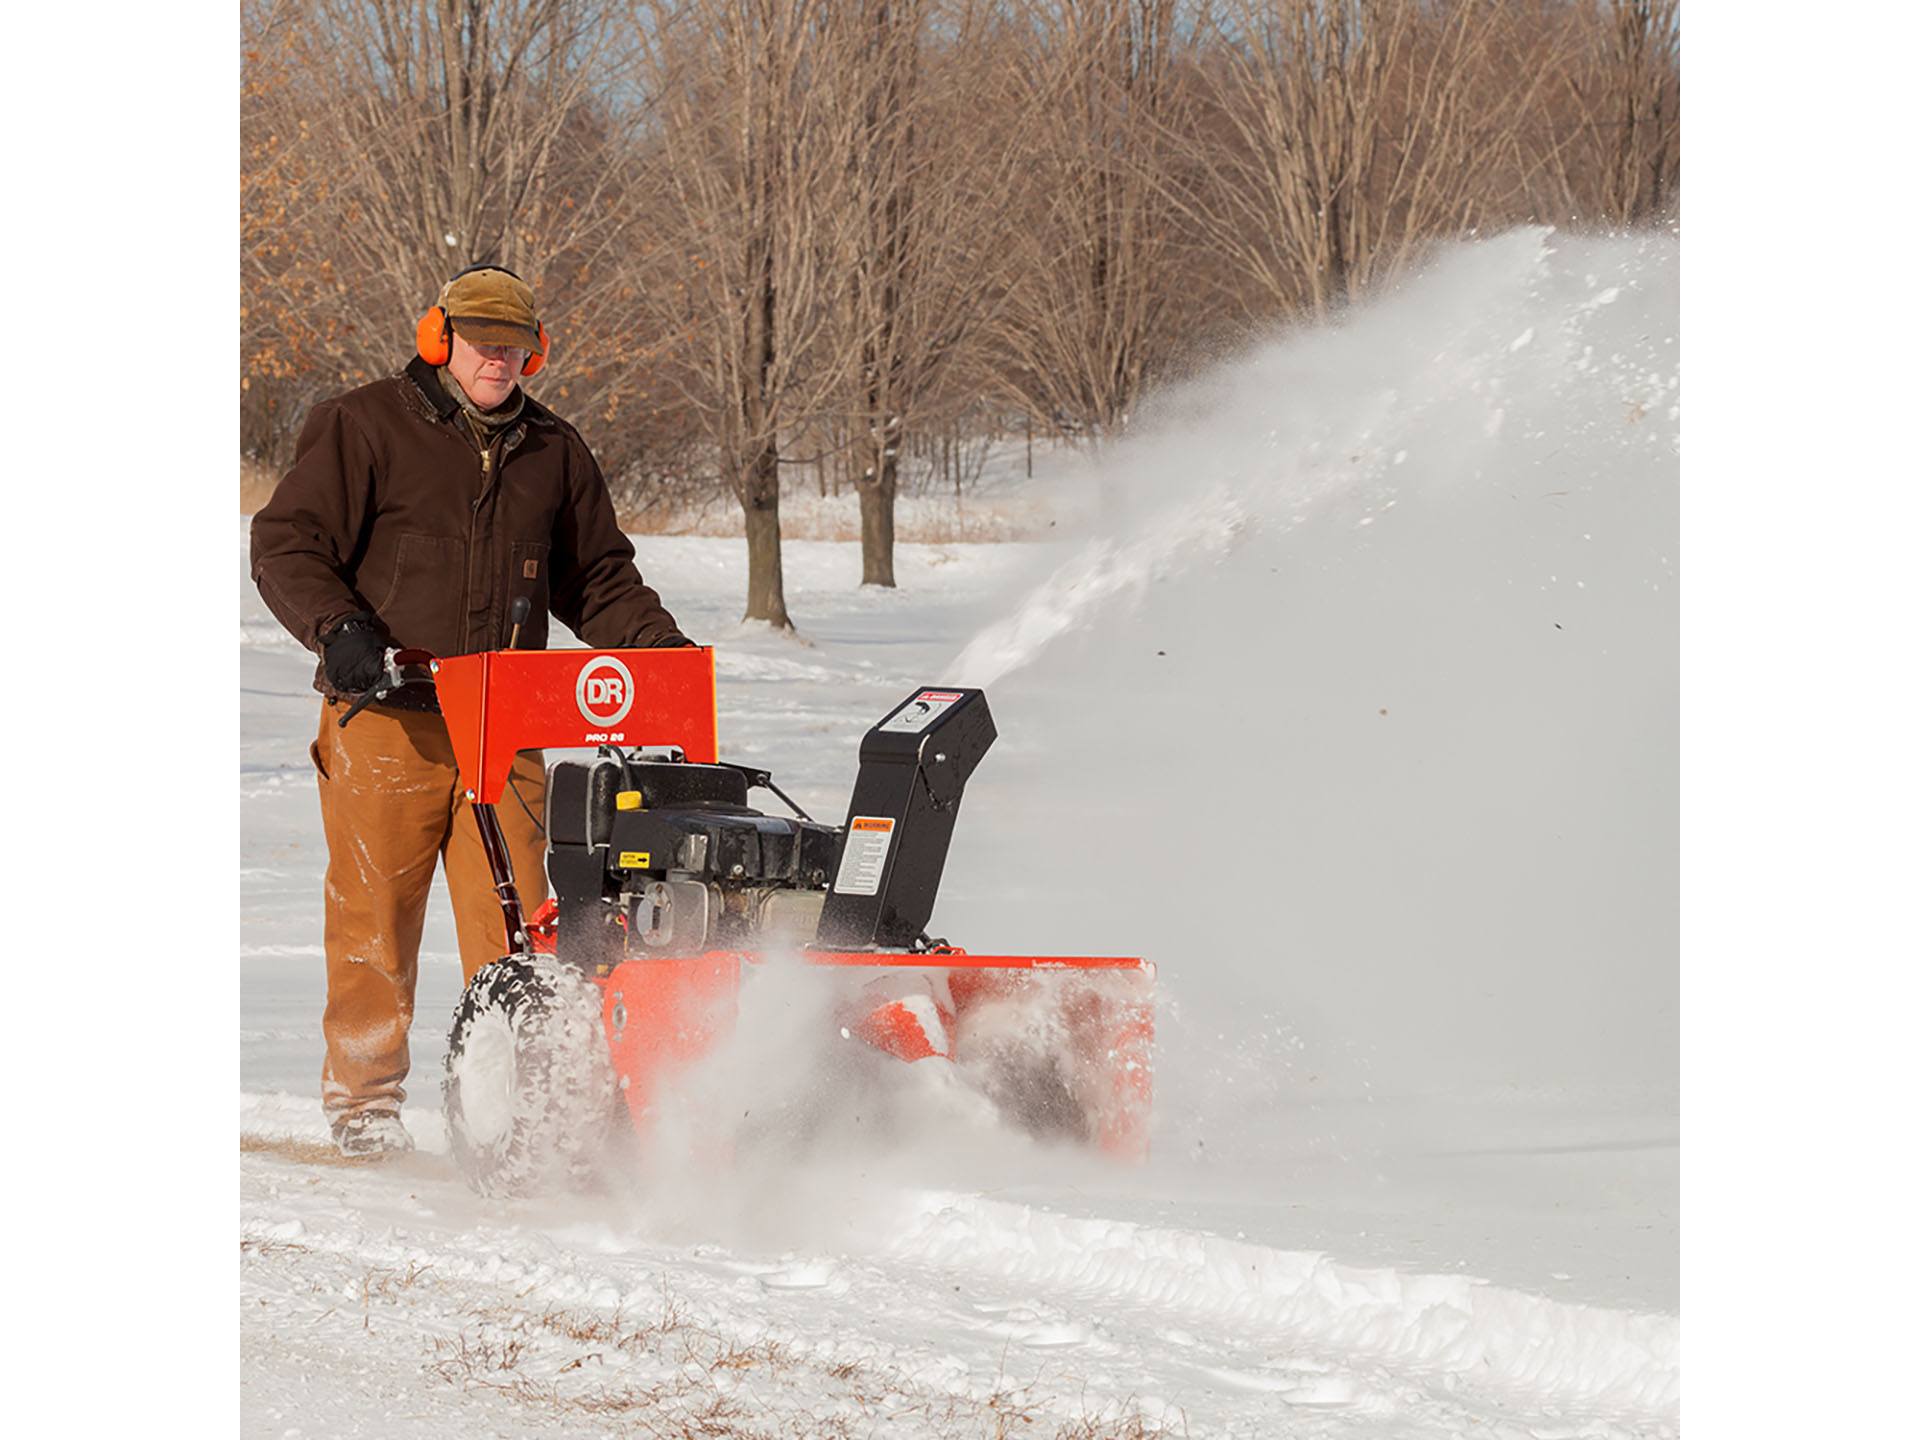 DR Power Equipment Snow Thrower Attachment in Lowell, Michigan - Photo 2